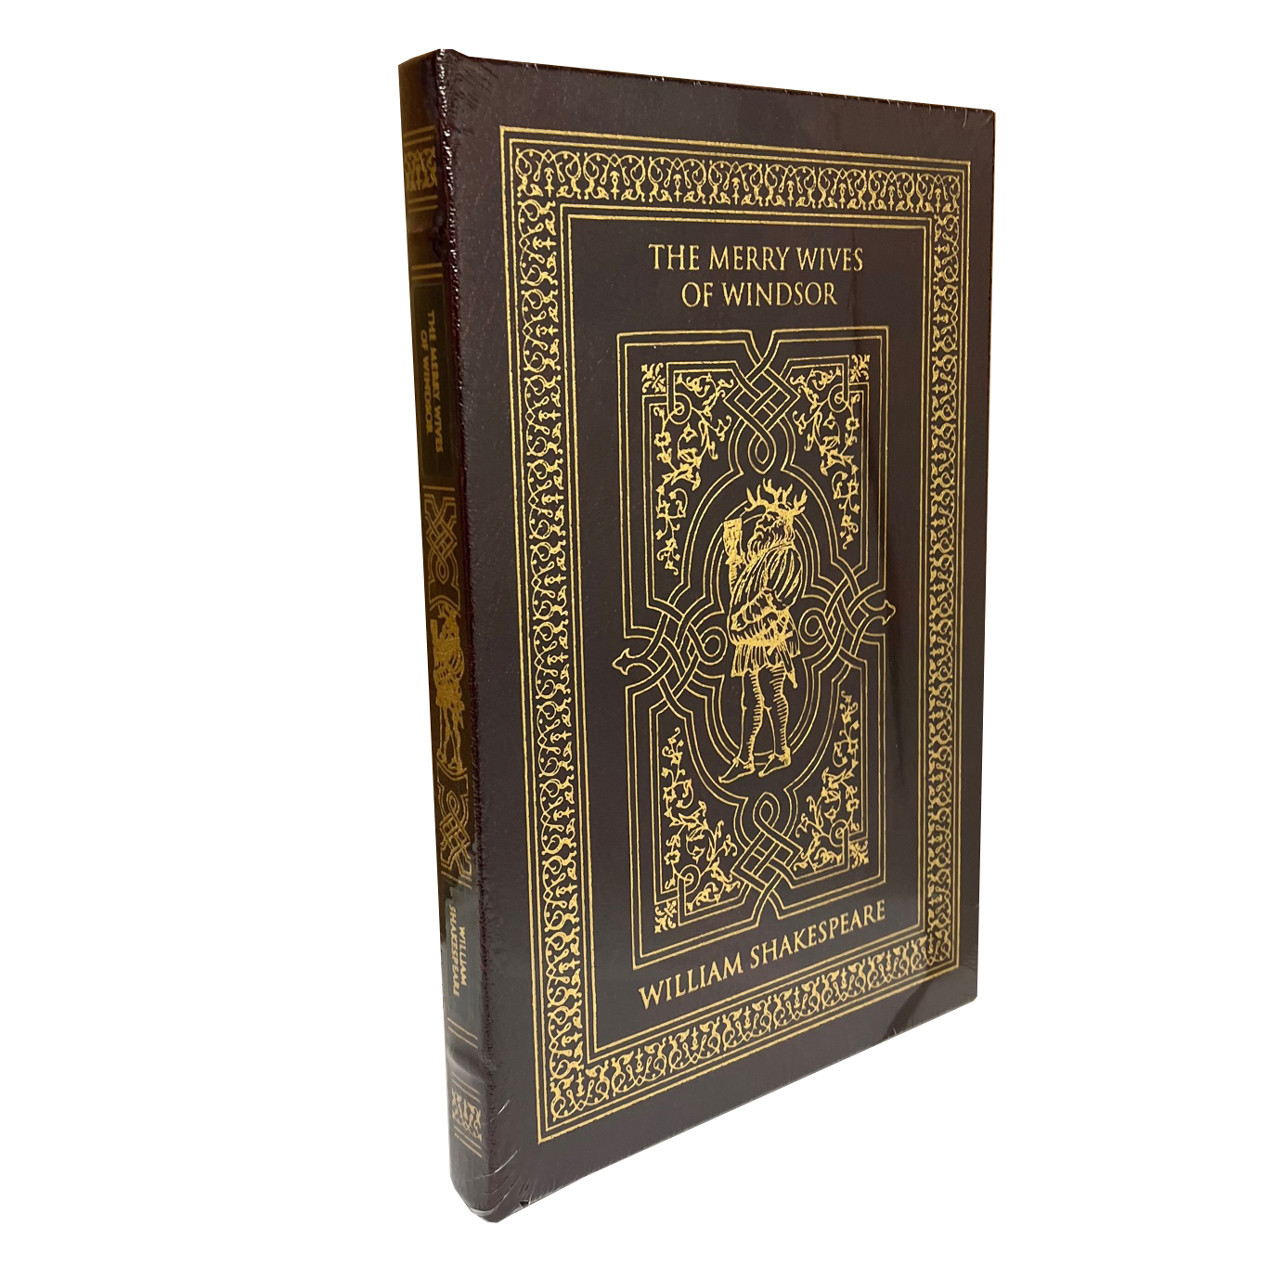 William Shakespeare "The Merry Wives Of Windsor" Leather Bound Collector's Edition [Sealed]